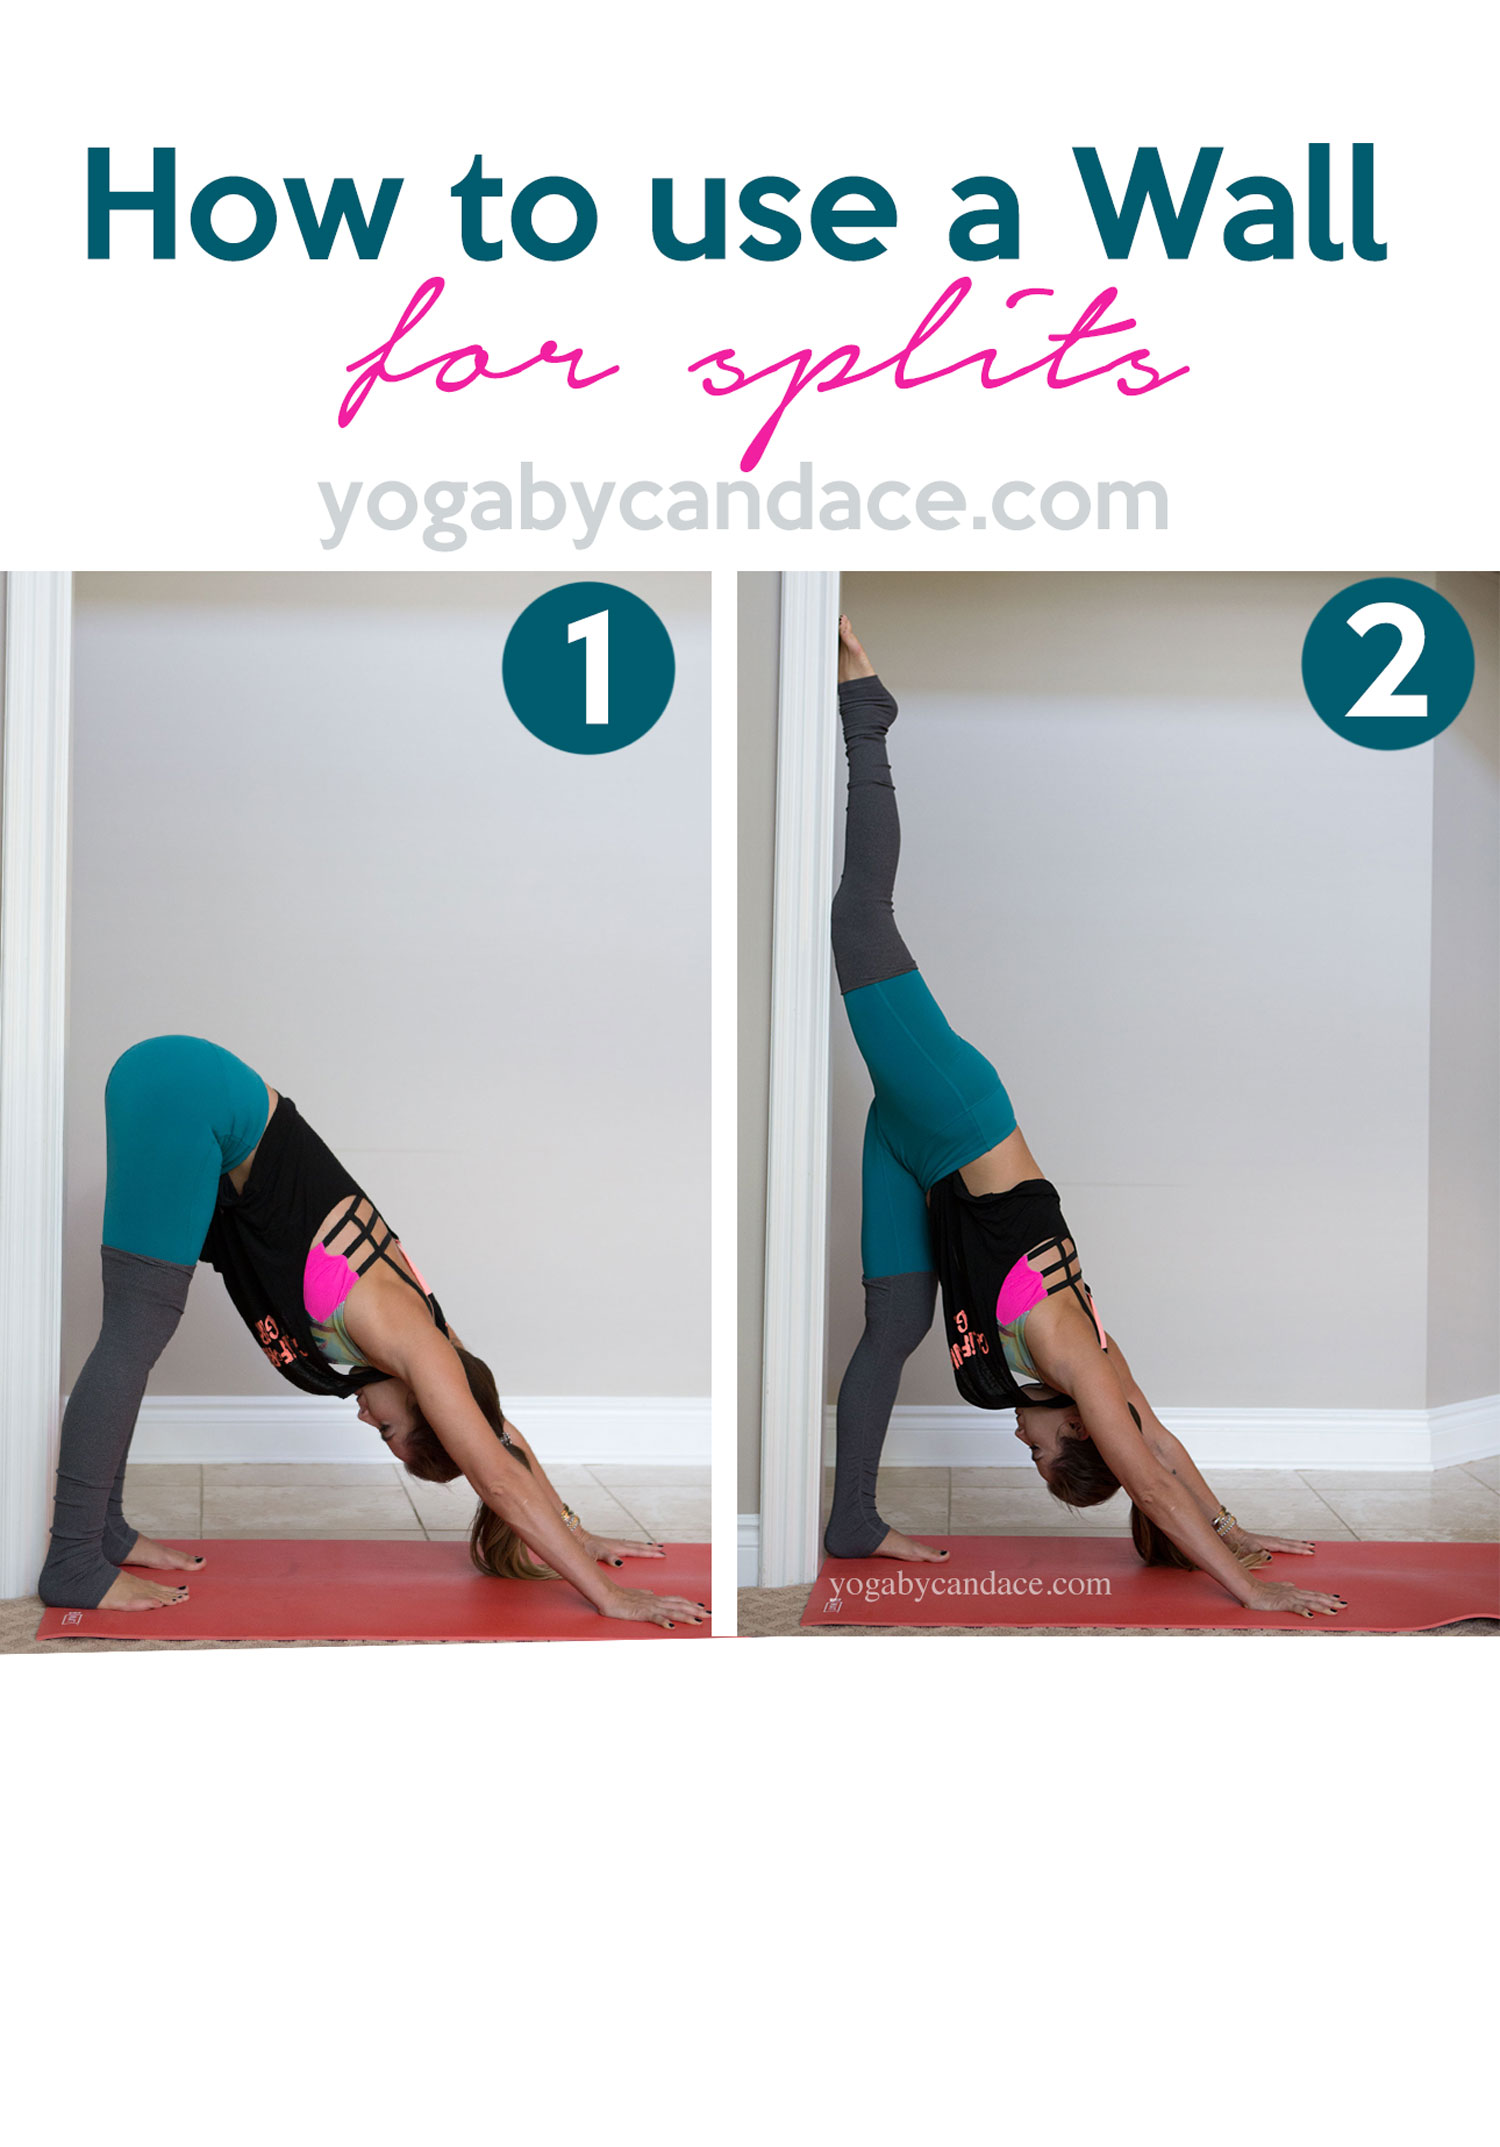 How to use a wall for splits — YOGABYCANDACE